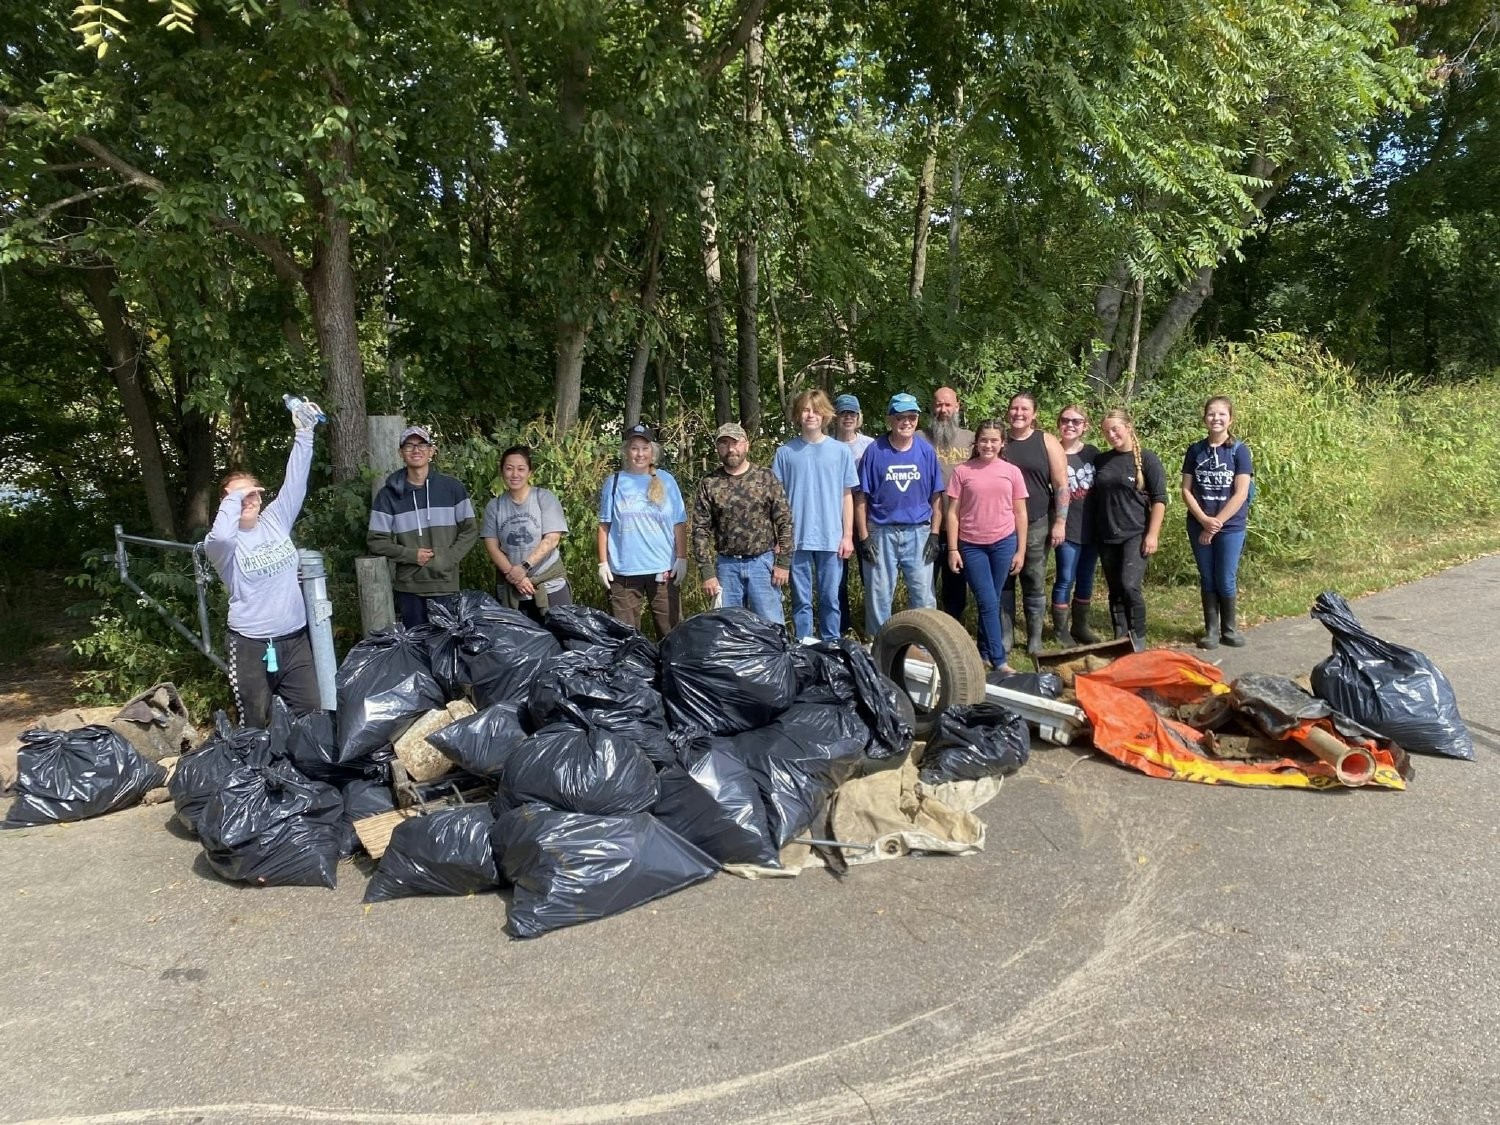 MetroParks is blessed with many volunteer groups who remove invasive species or clean up our parks.